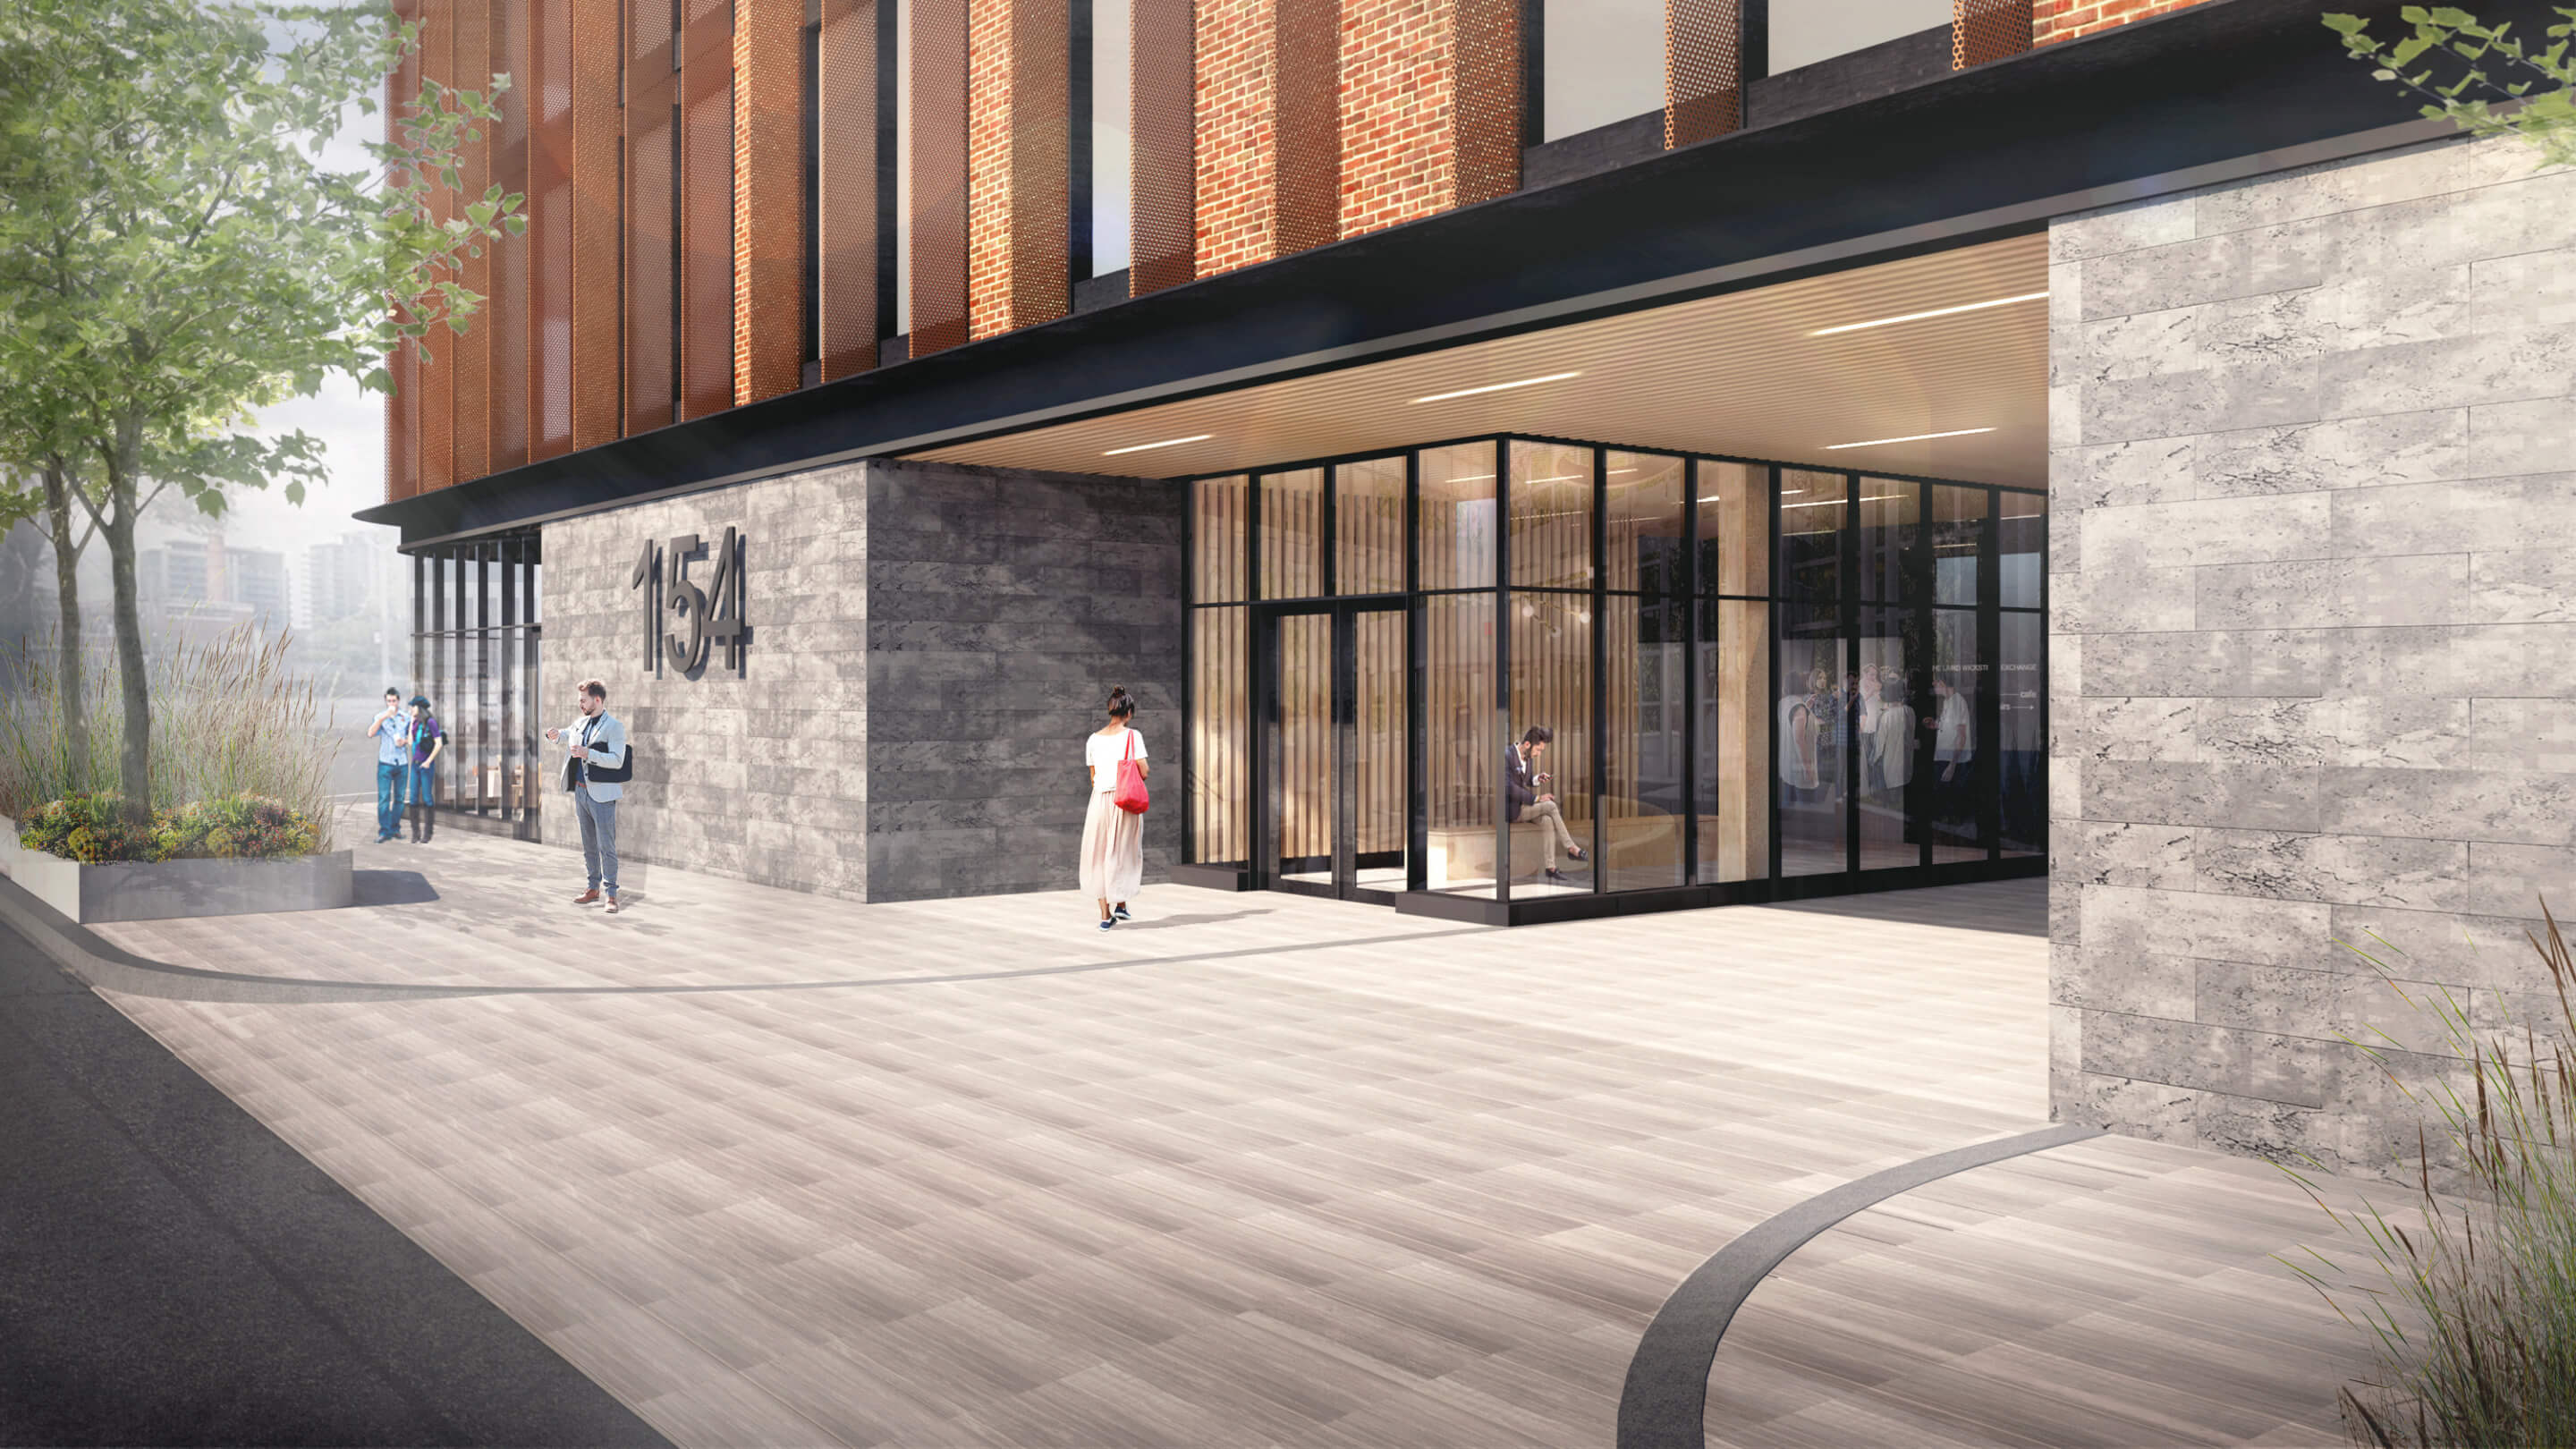 rendering of an office building entrance